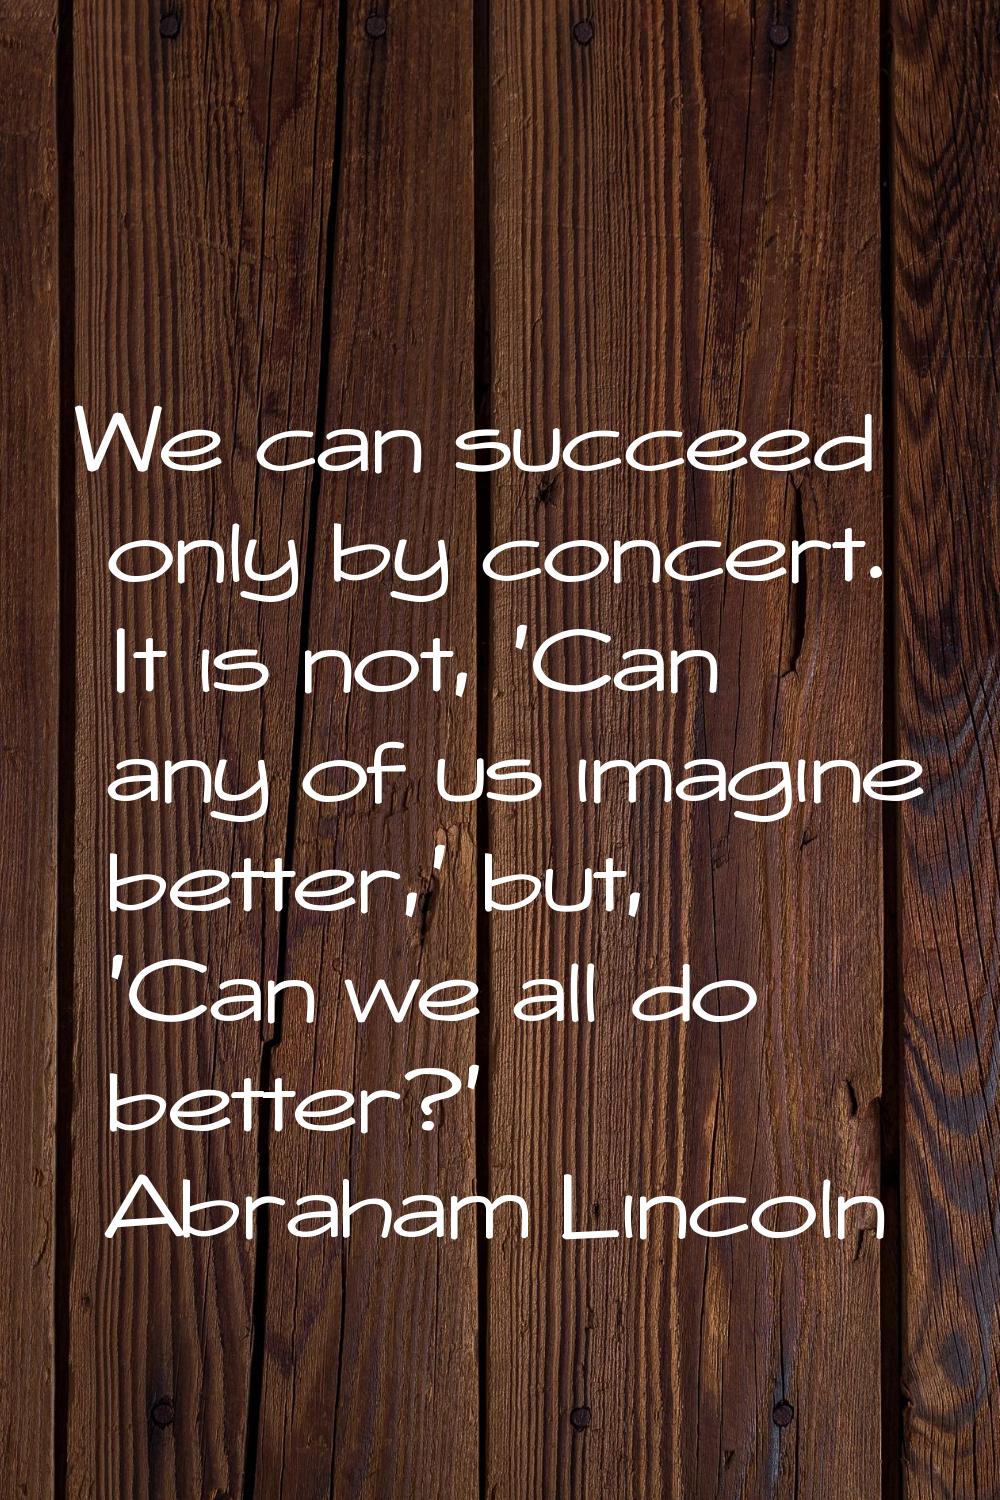 We can succeed only by concert. It is not, 'Can any of us imagine better,' but, 'Can we all do bett